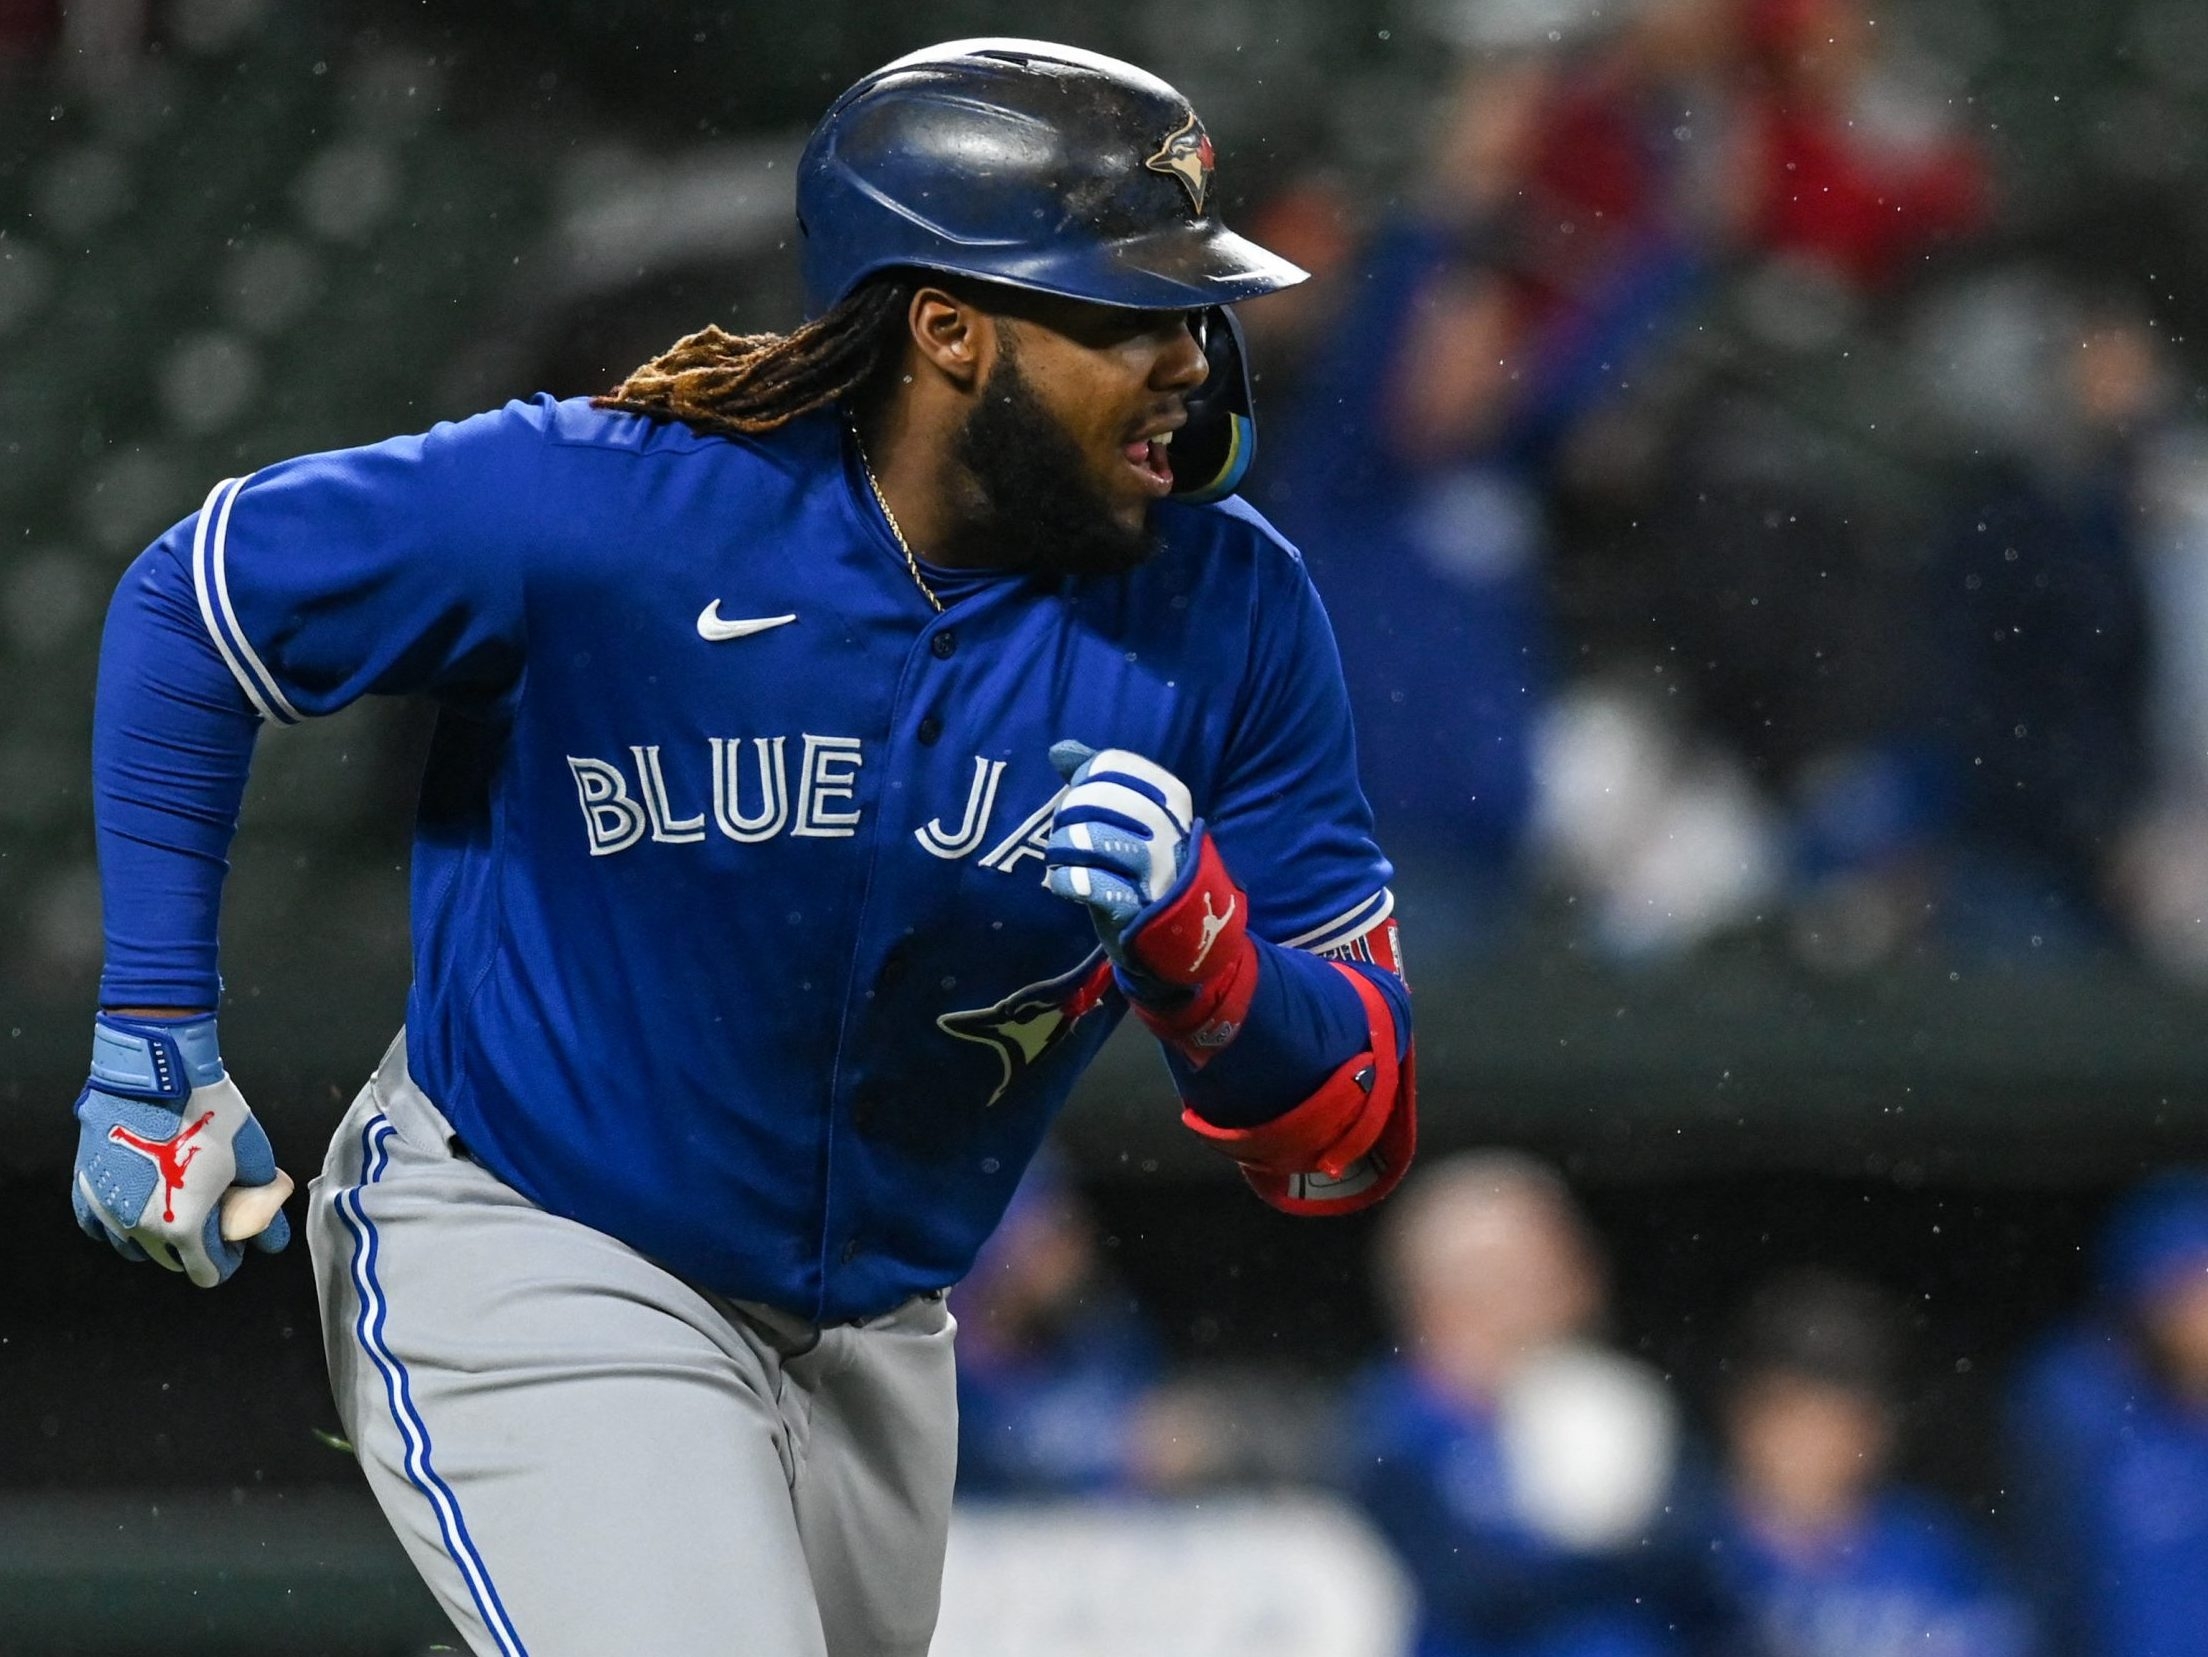 Blue Jays Season Preview: Toronto is loudly on the come up